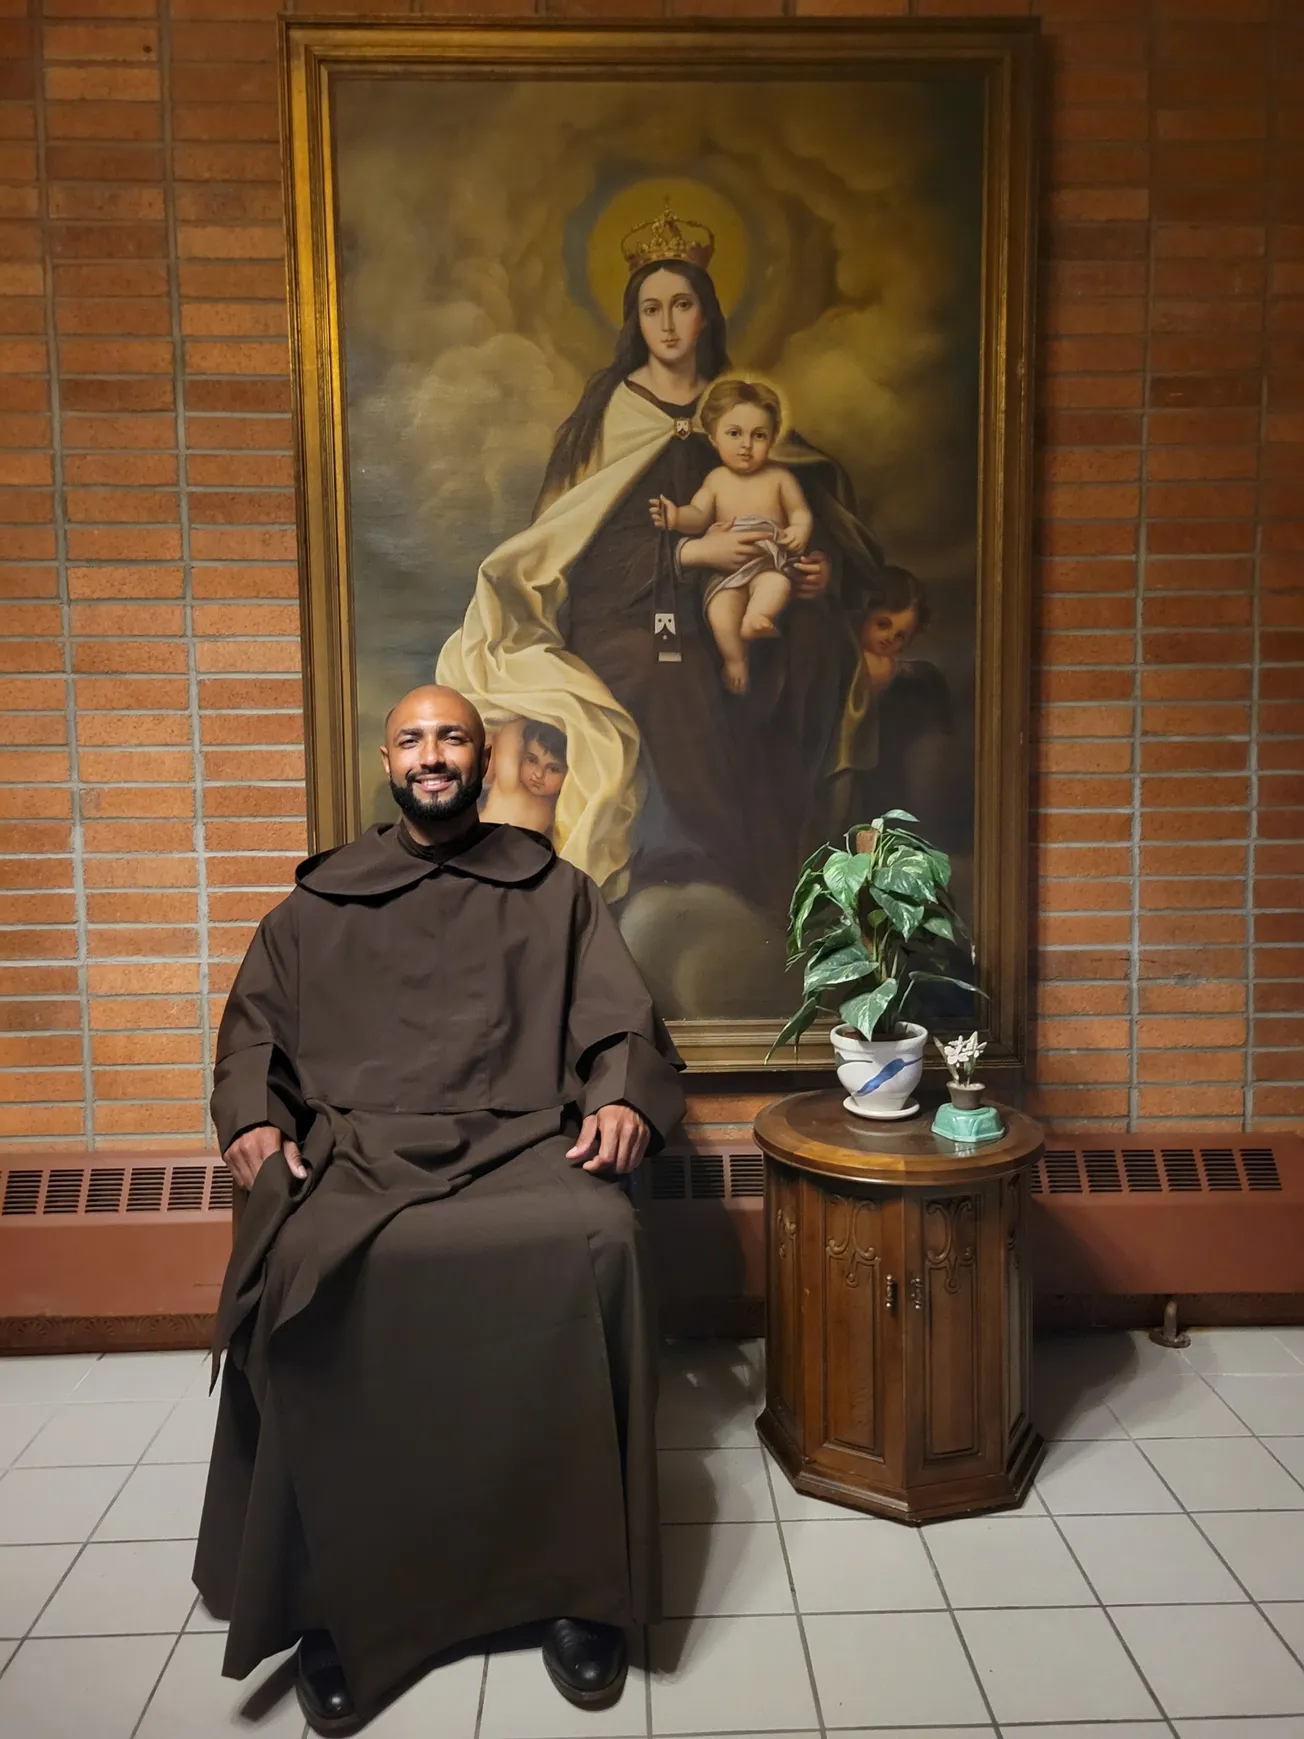 Br Derrick Turrentine making first vows with Carmelites on June 12 in New York